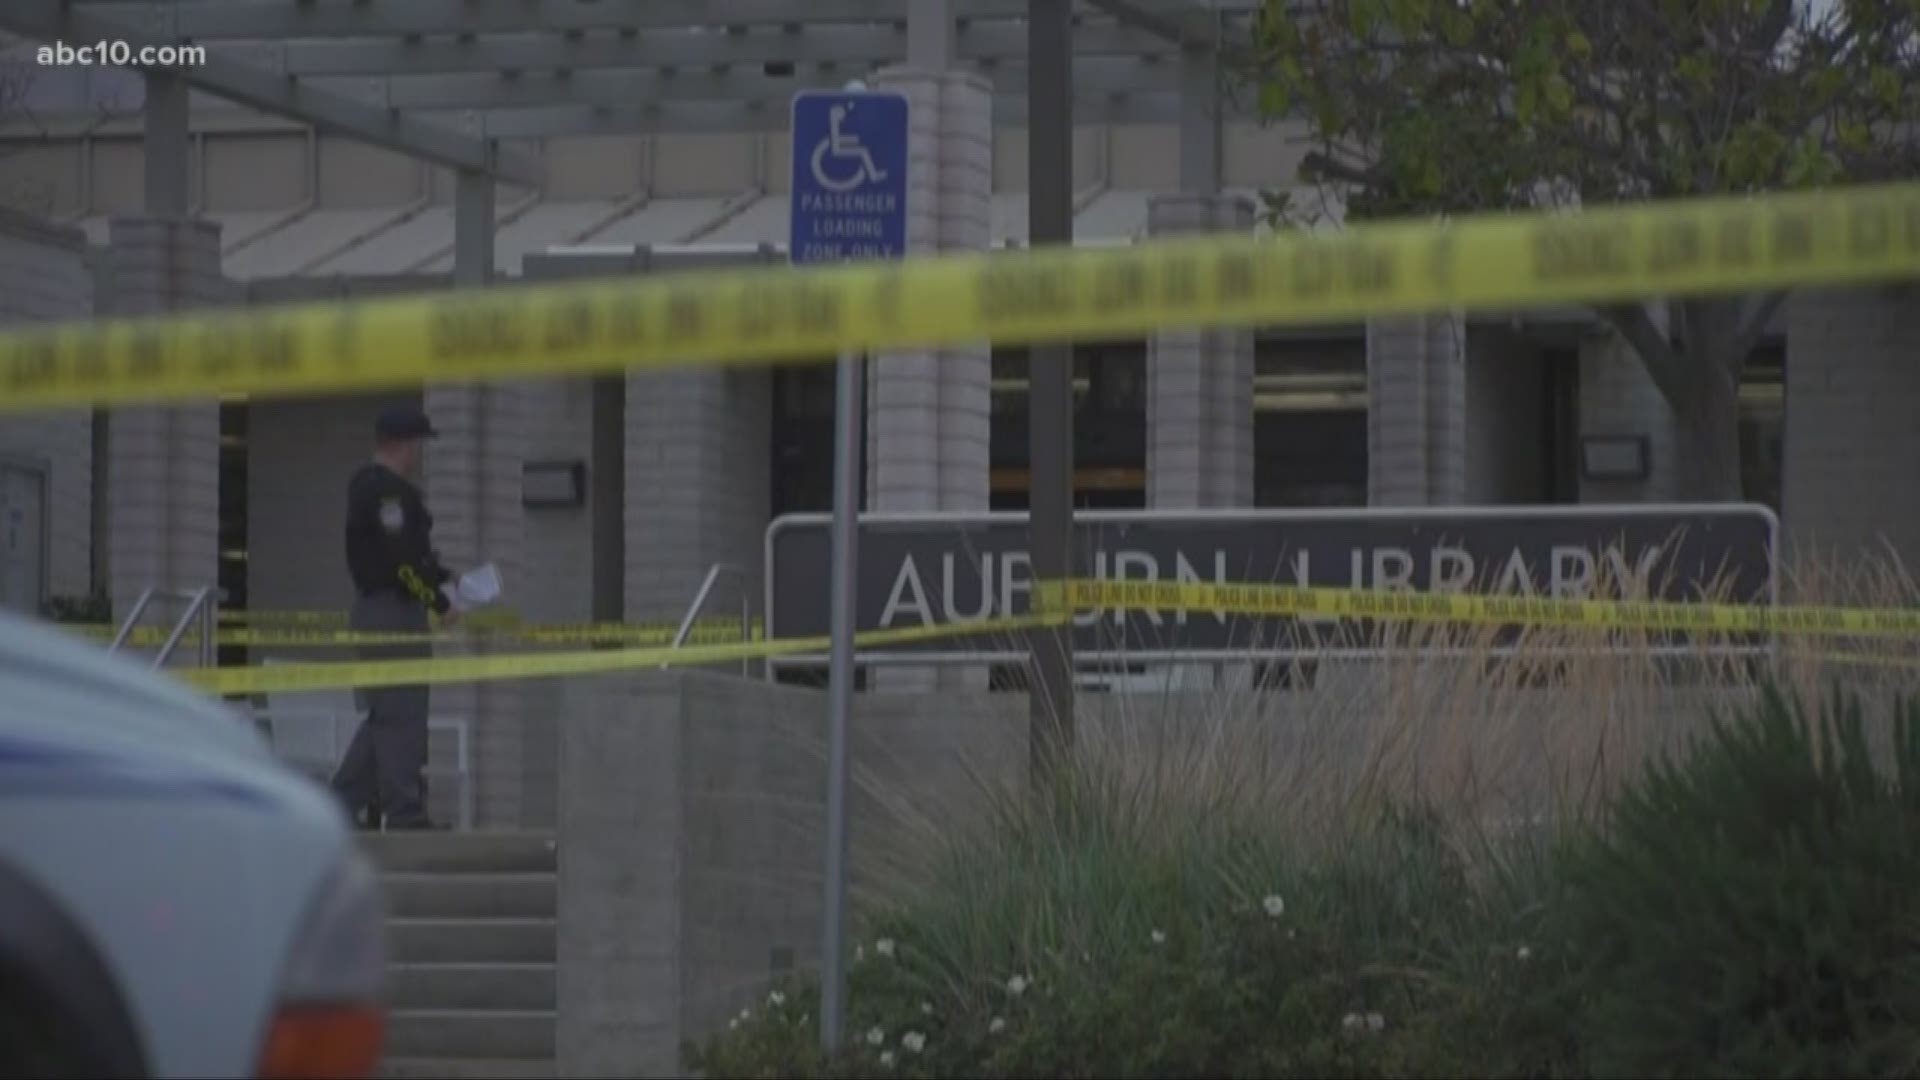 Auburn police are still looking for the man they say injured three people at an Auburn library.